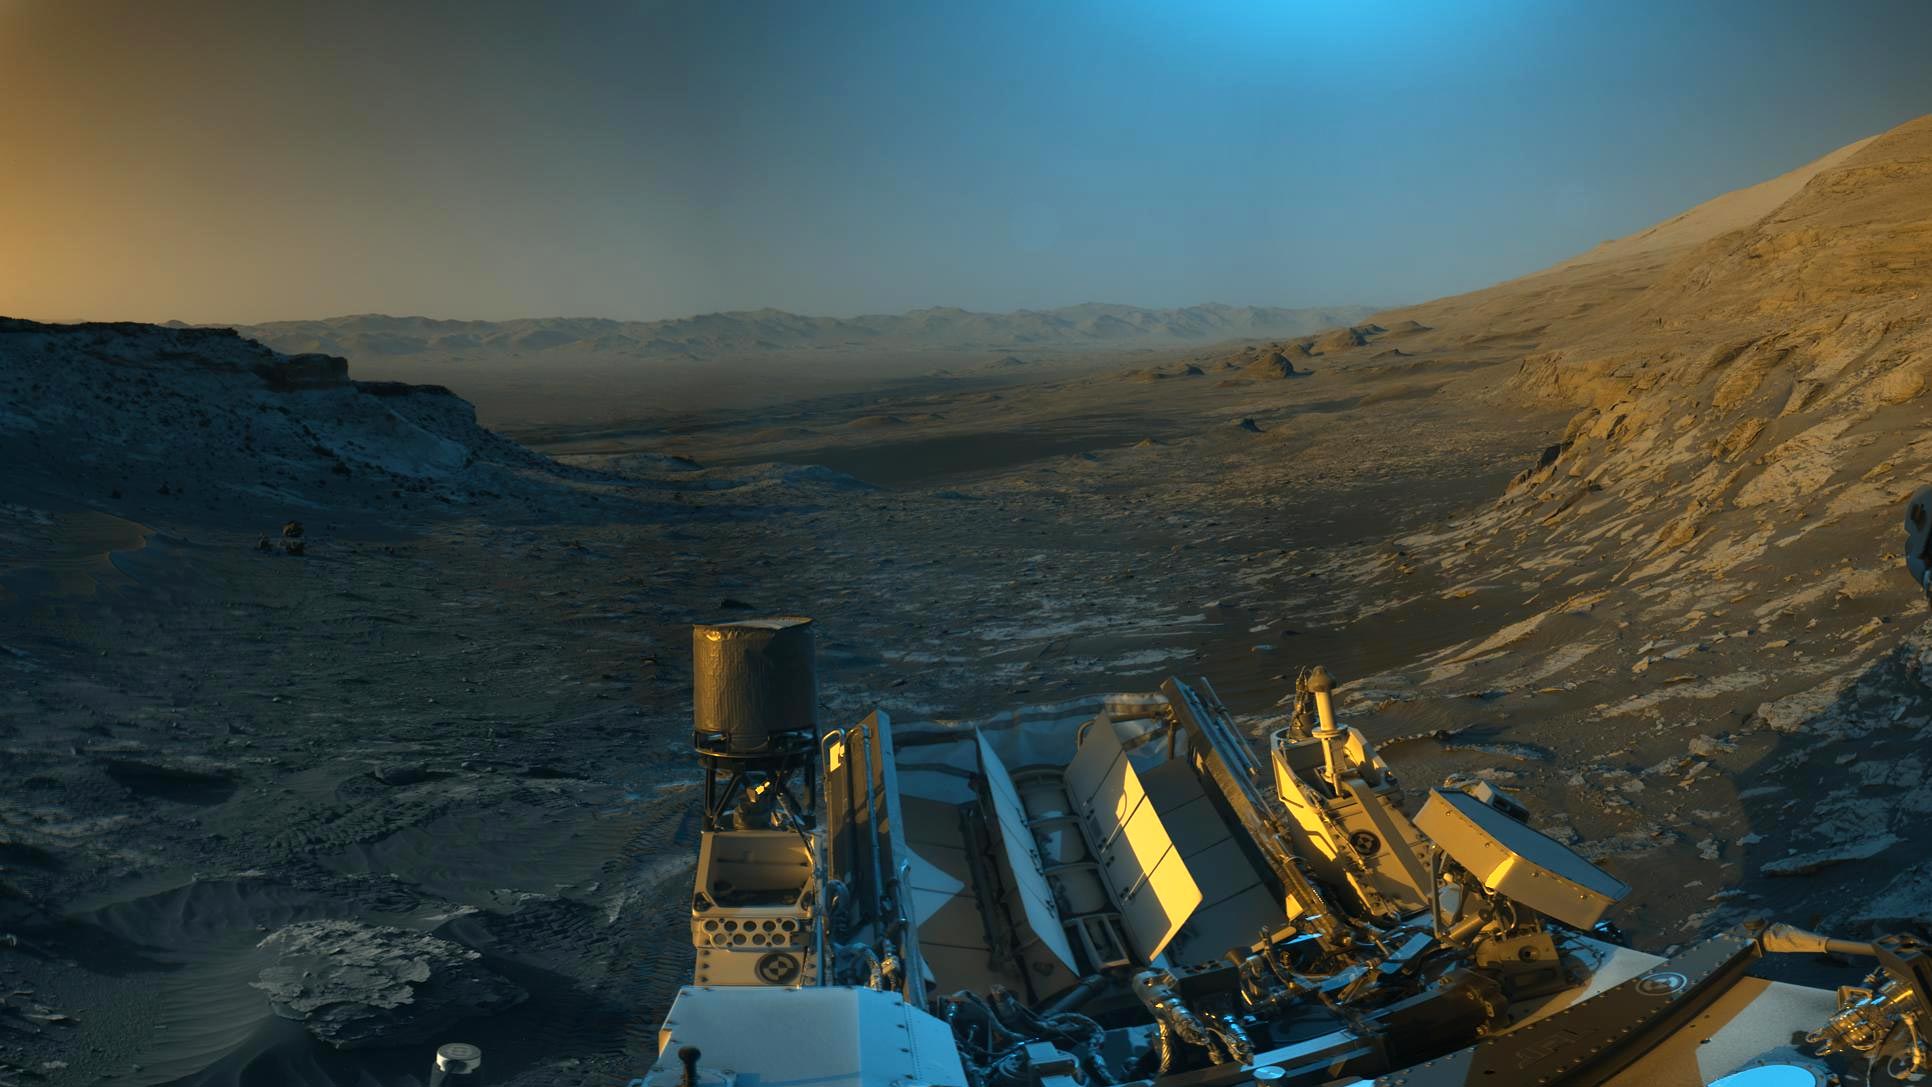 NASA’s Curiosity Rover Sends a Beautiful Picture Postcard From Mars - SciTechDaily